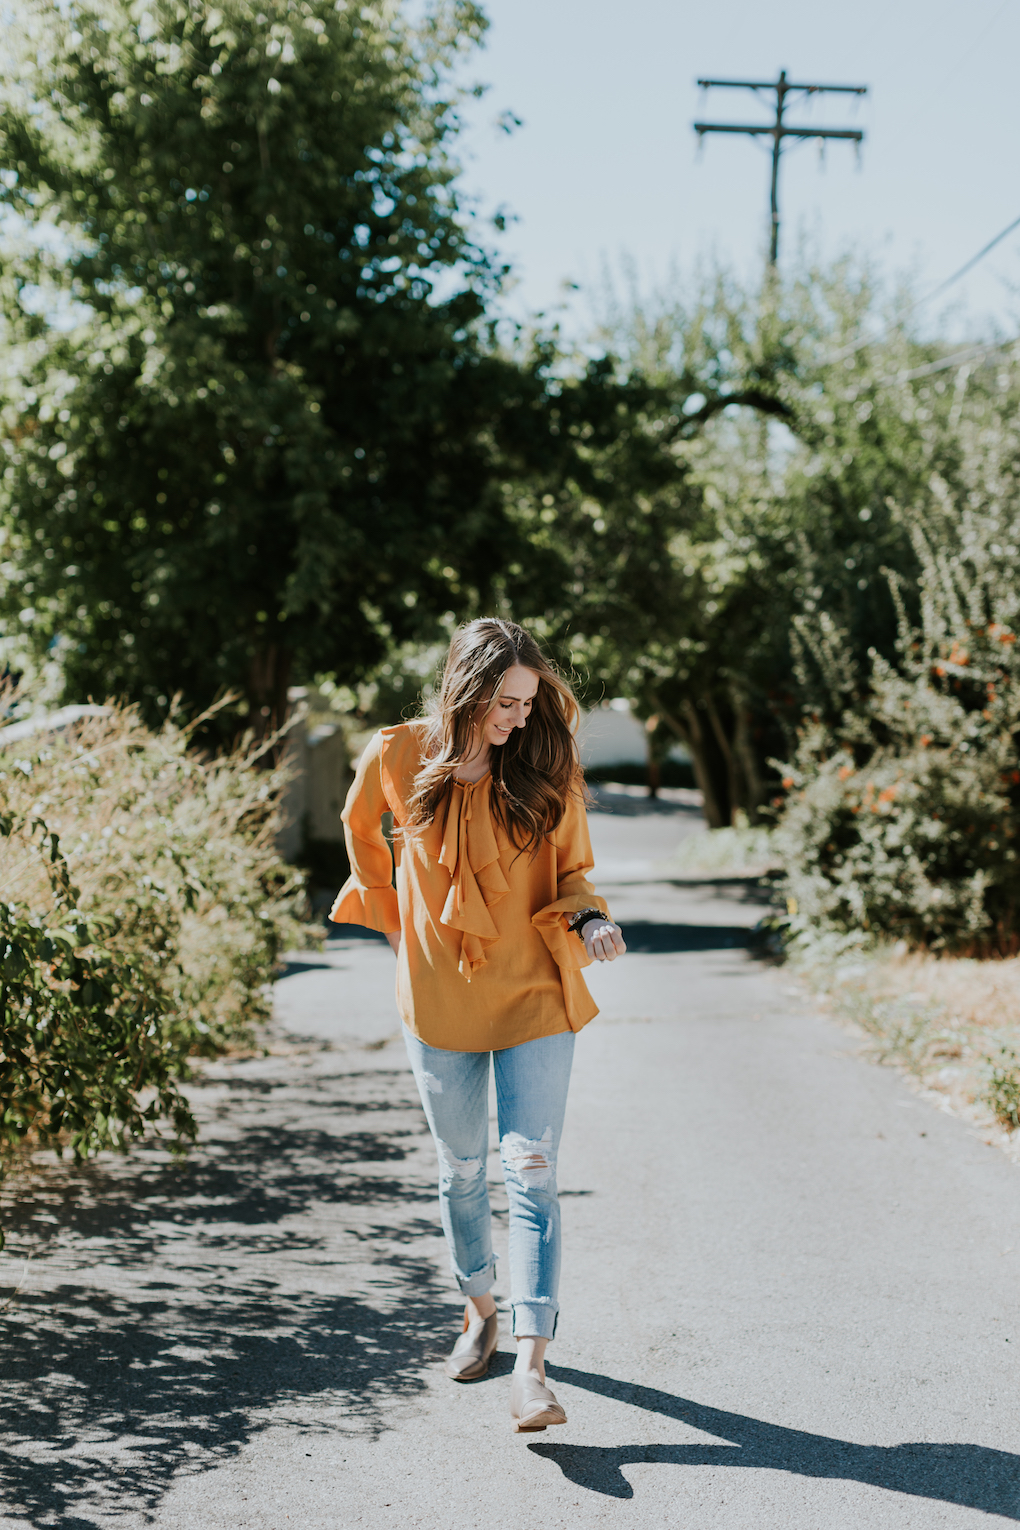 girl with brown caramel hair wearing mustard orange sheer ruffle top with distressed jeans